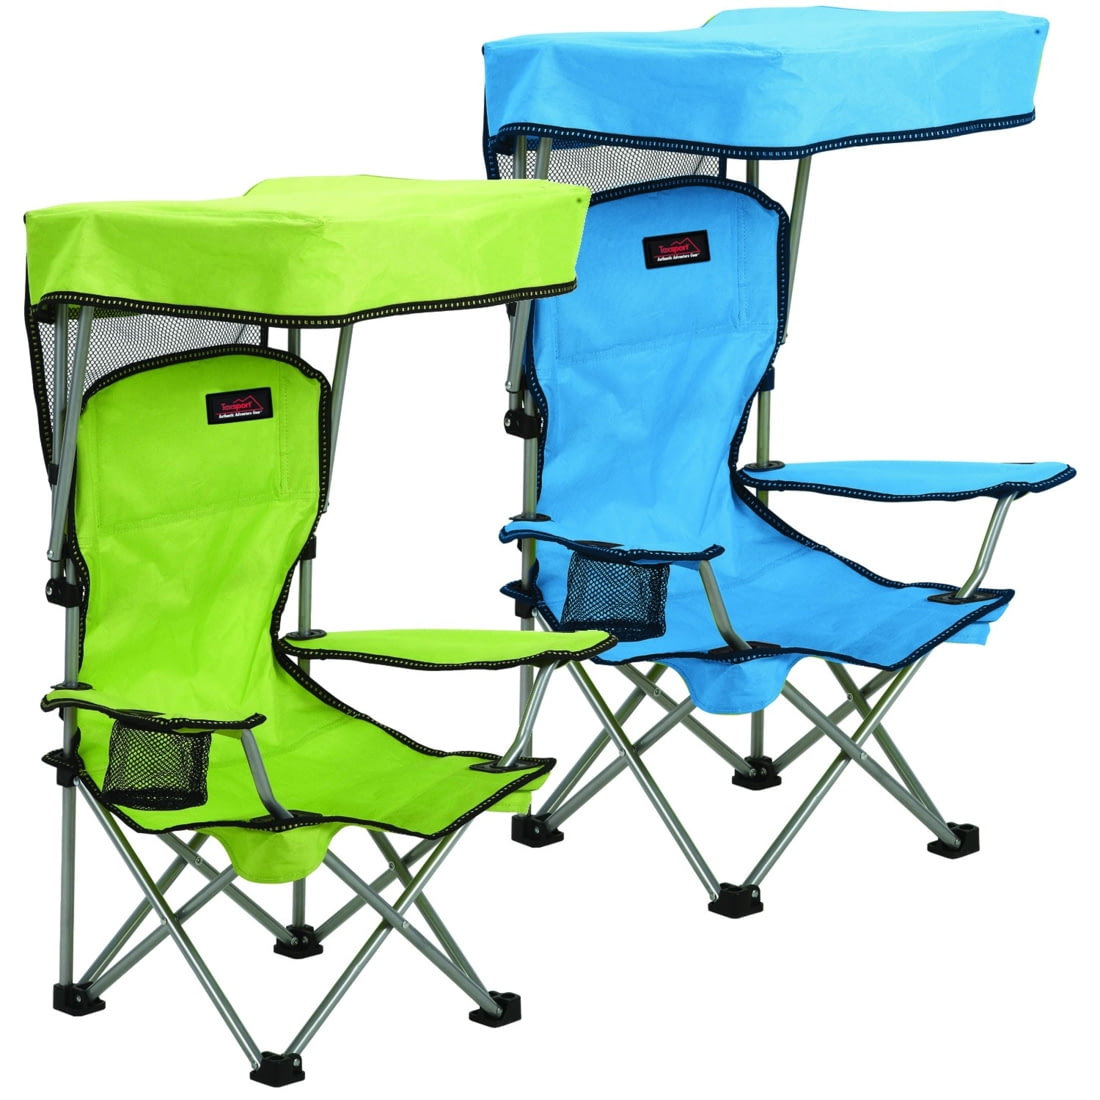 Opplanet Texsport Bright Kids Canopy Chair Steel Frame Fabric Main 